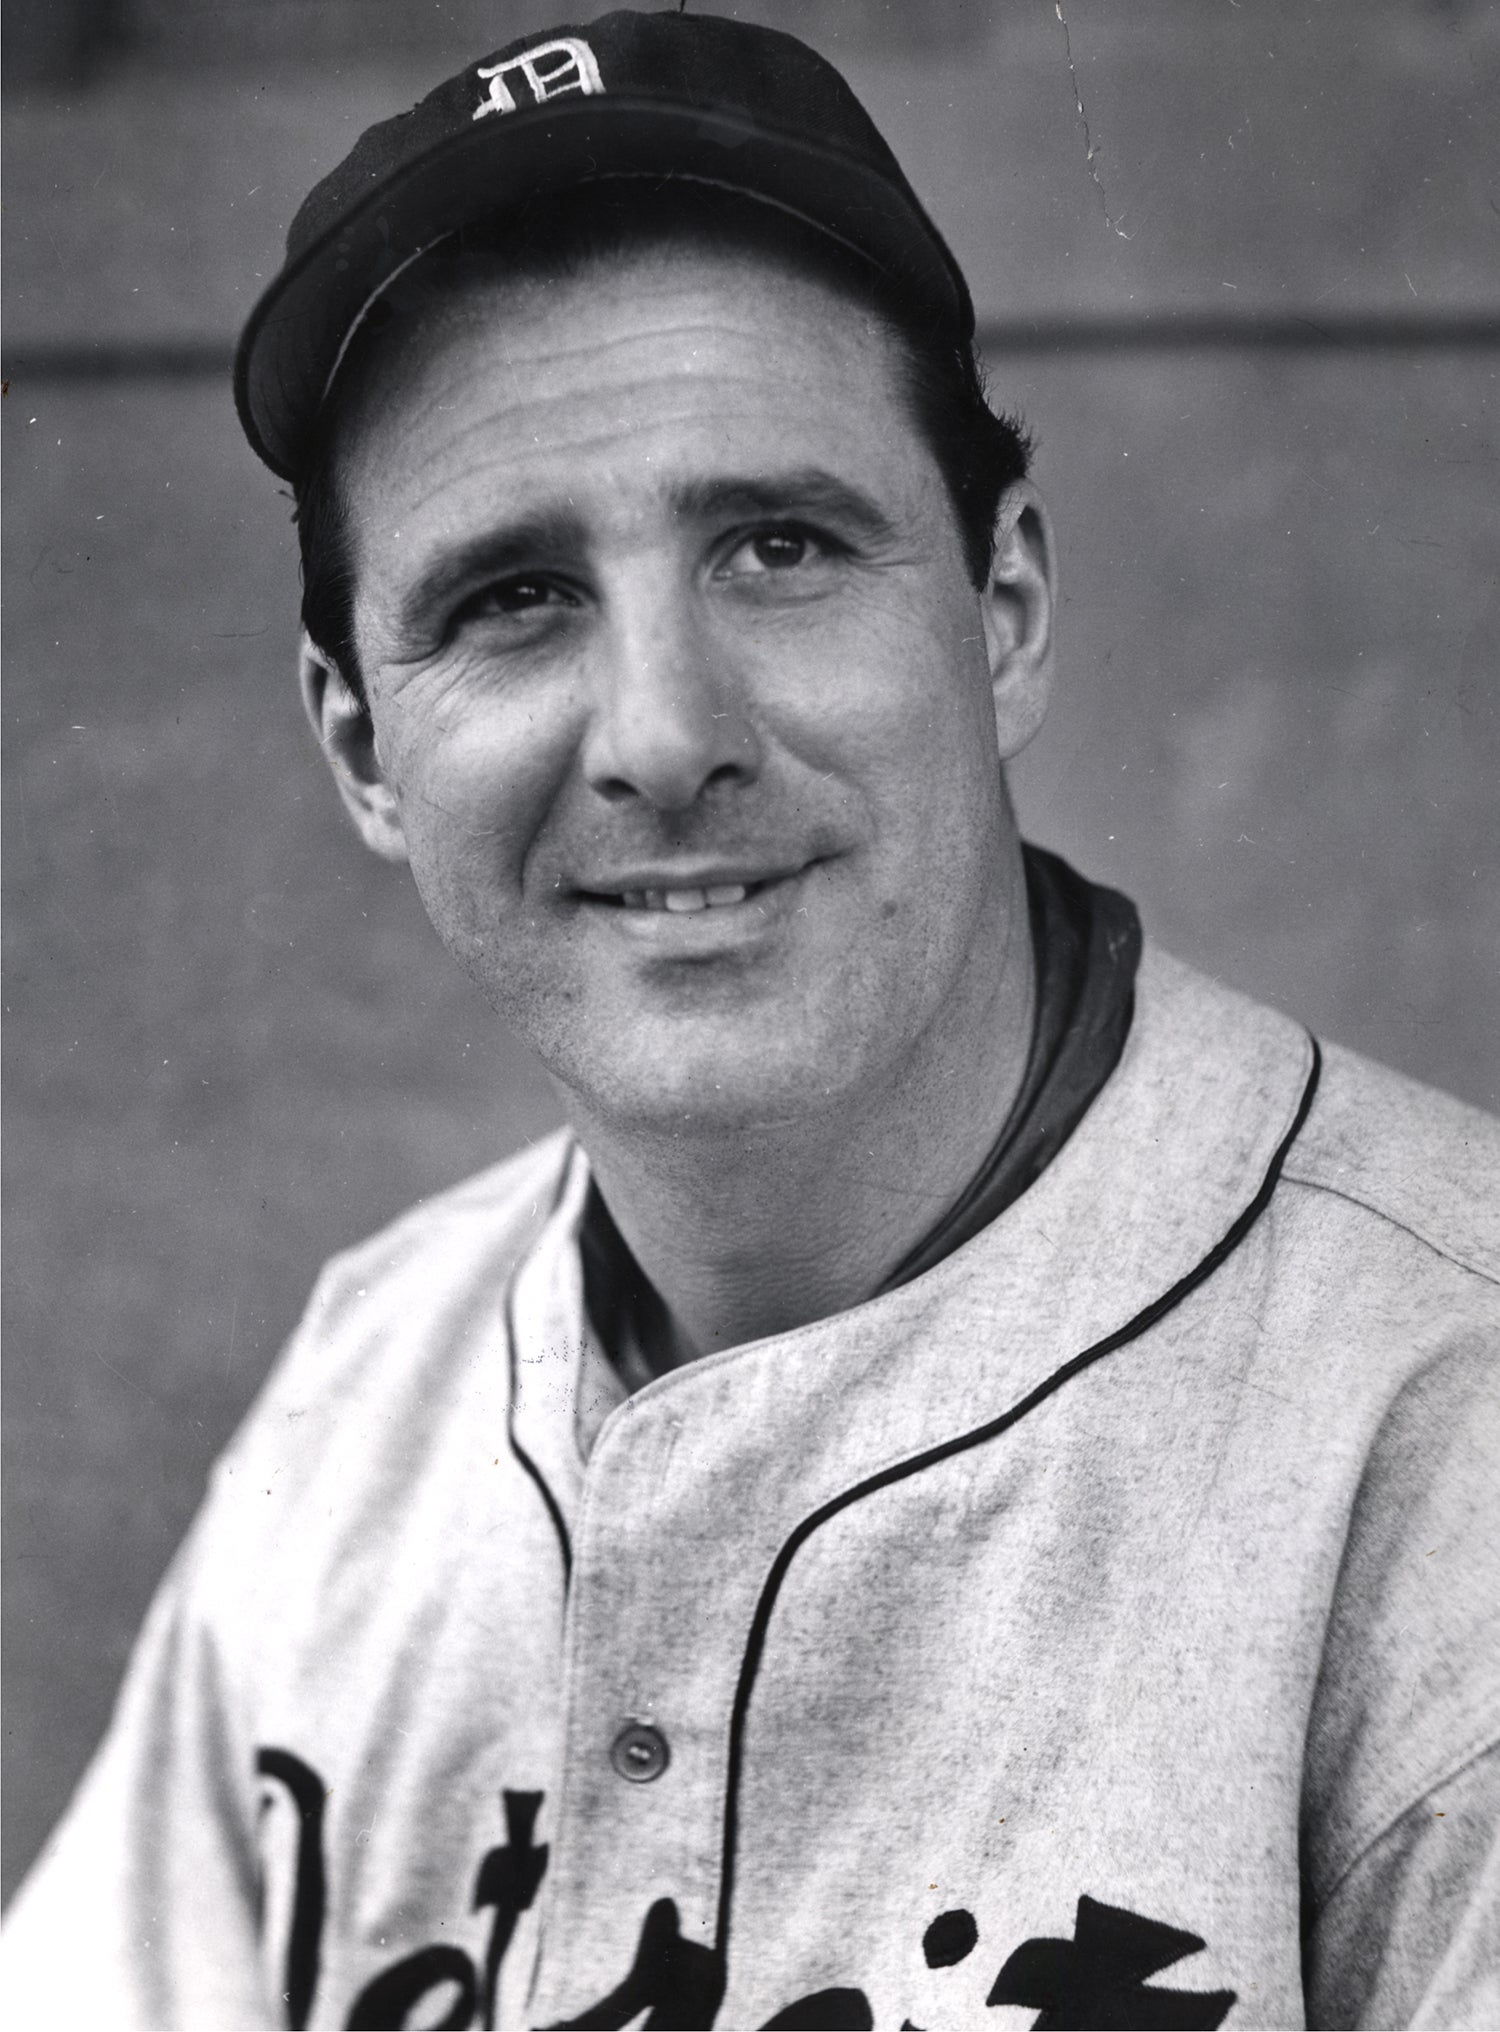 Tigers move first baseman Hank Greenberg to the outfield 